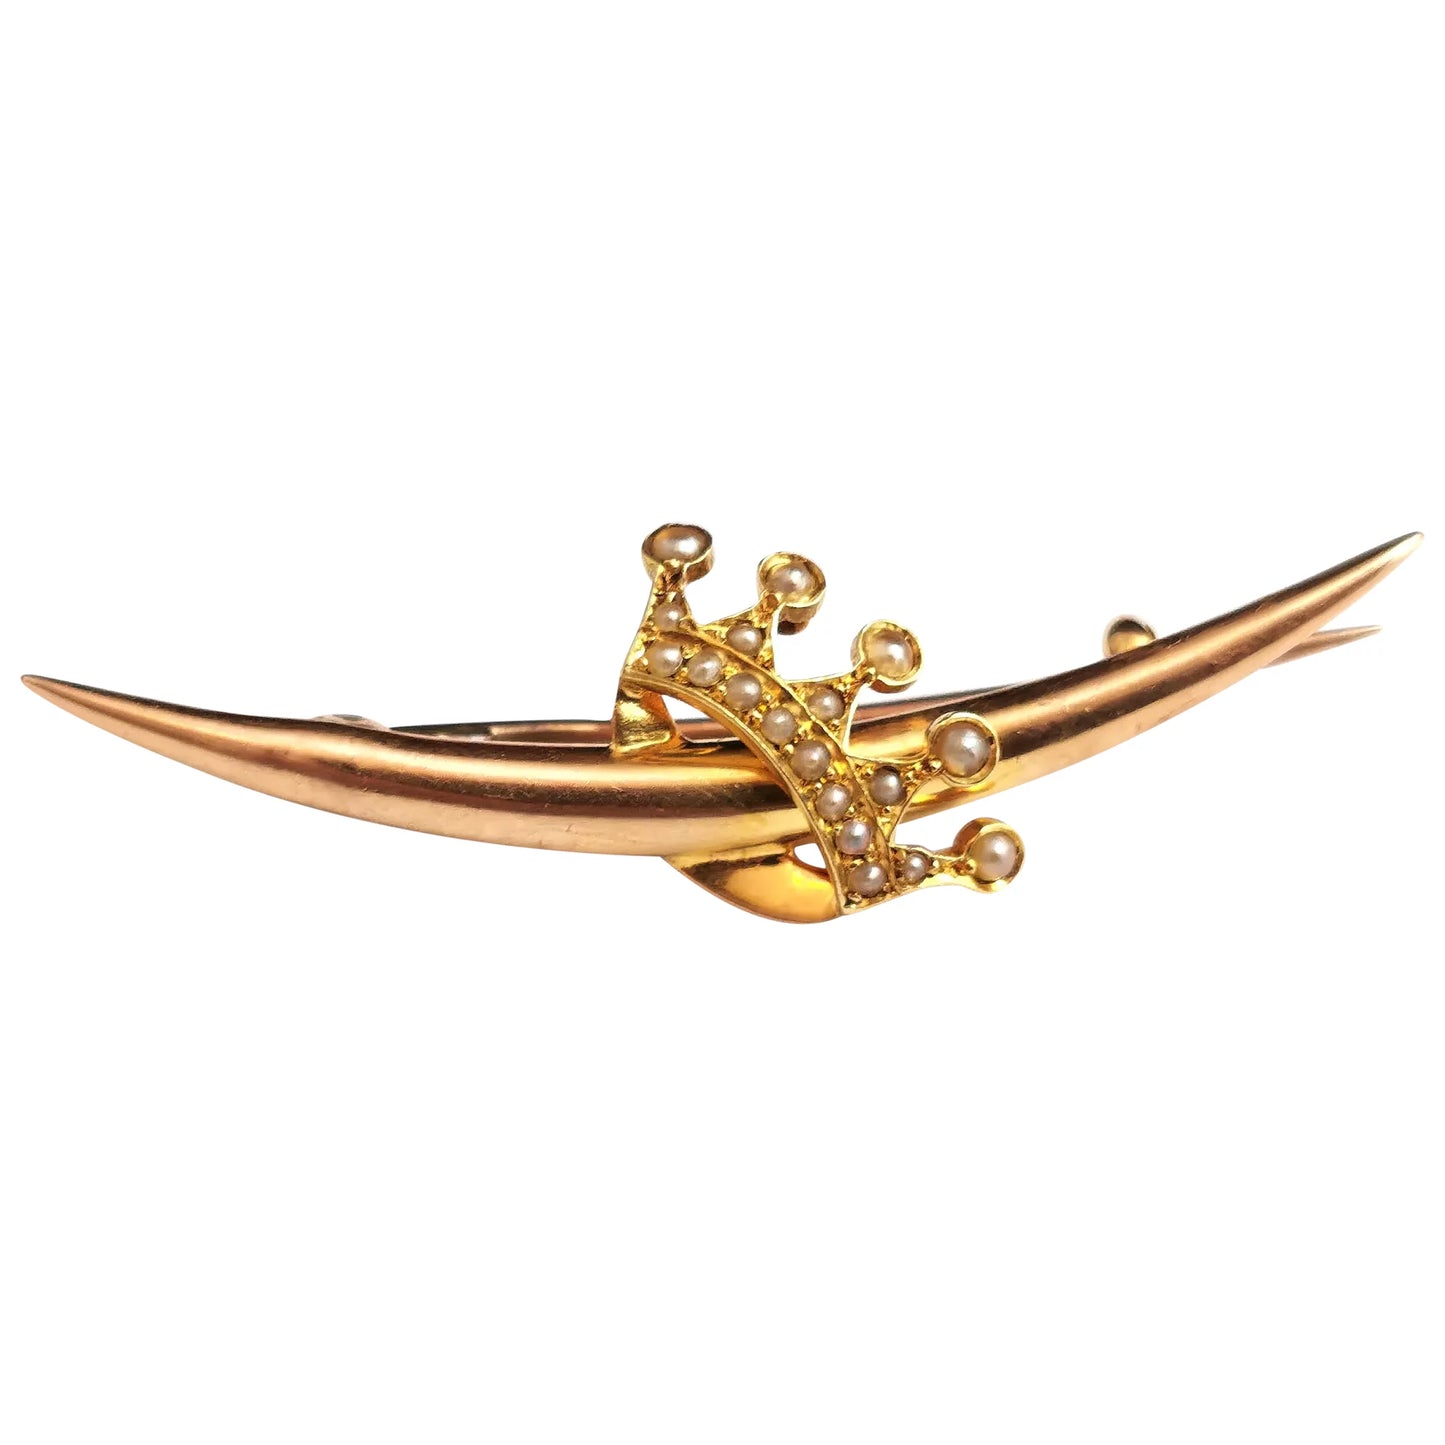 Antique Crescent and Crown brooch, 15ct gold and pearl, Victorian